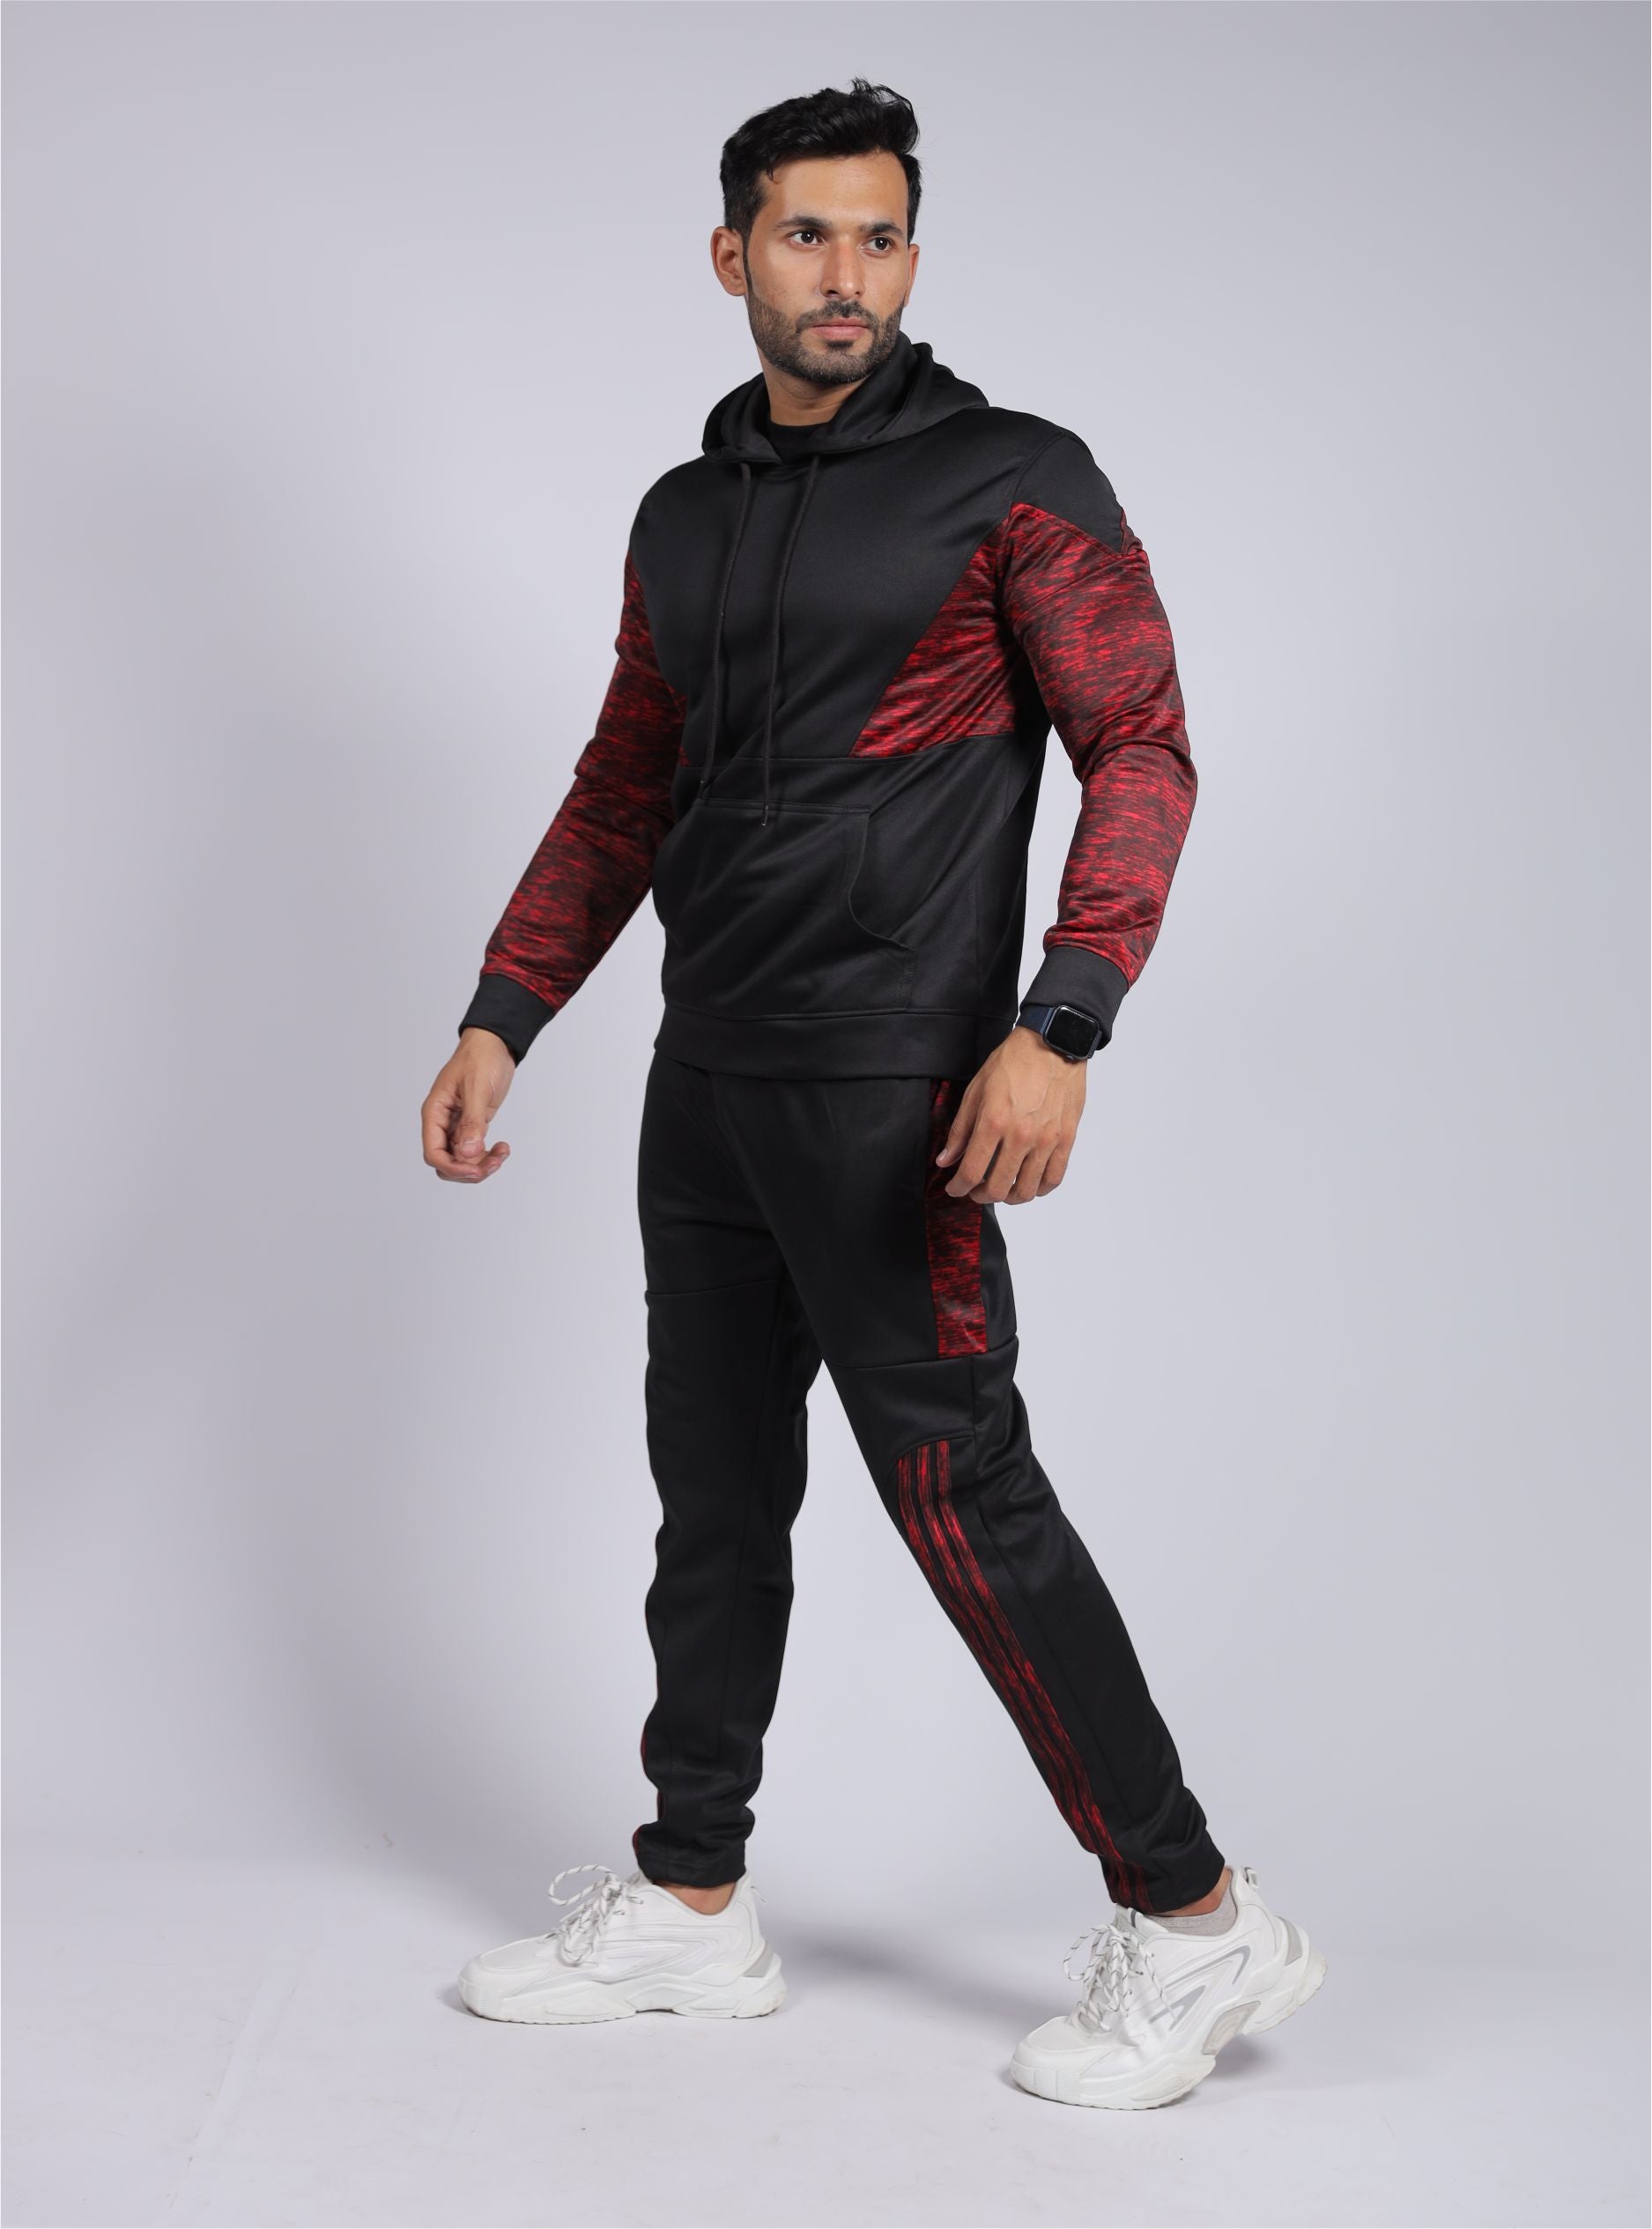 Mens winter tracksuits in pakistan, tracksuit for mens in pakistan,